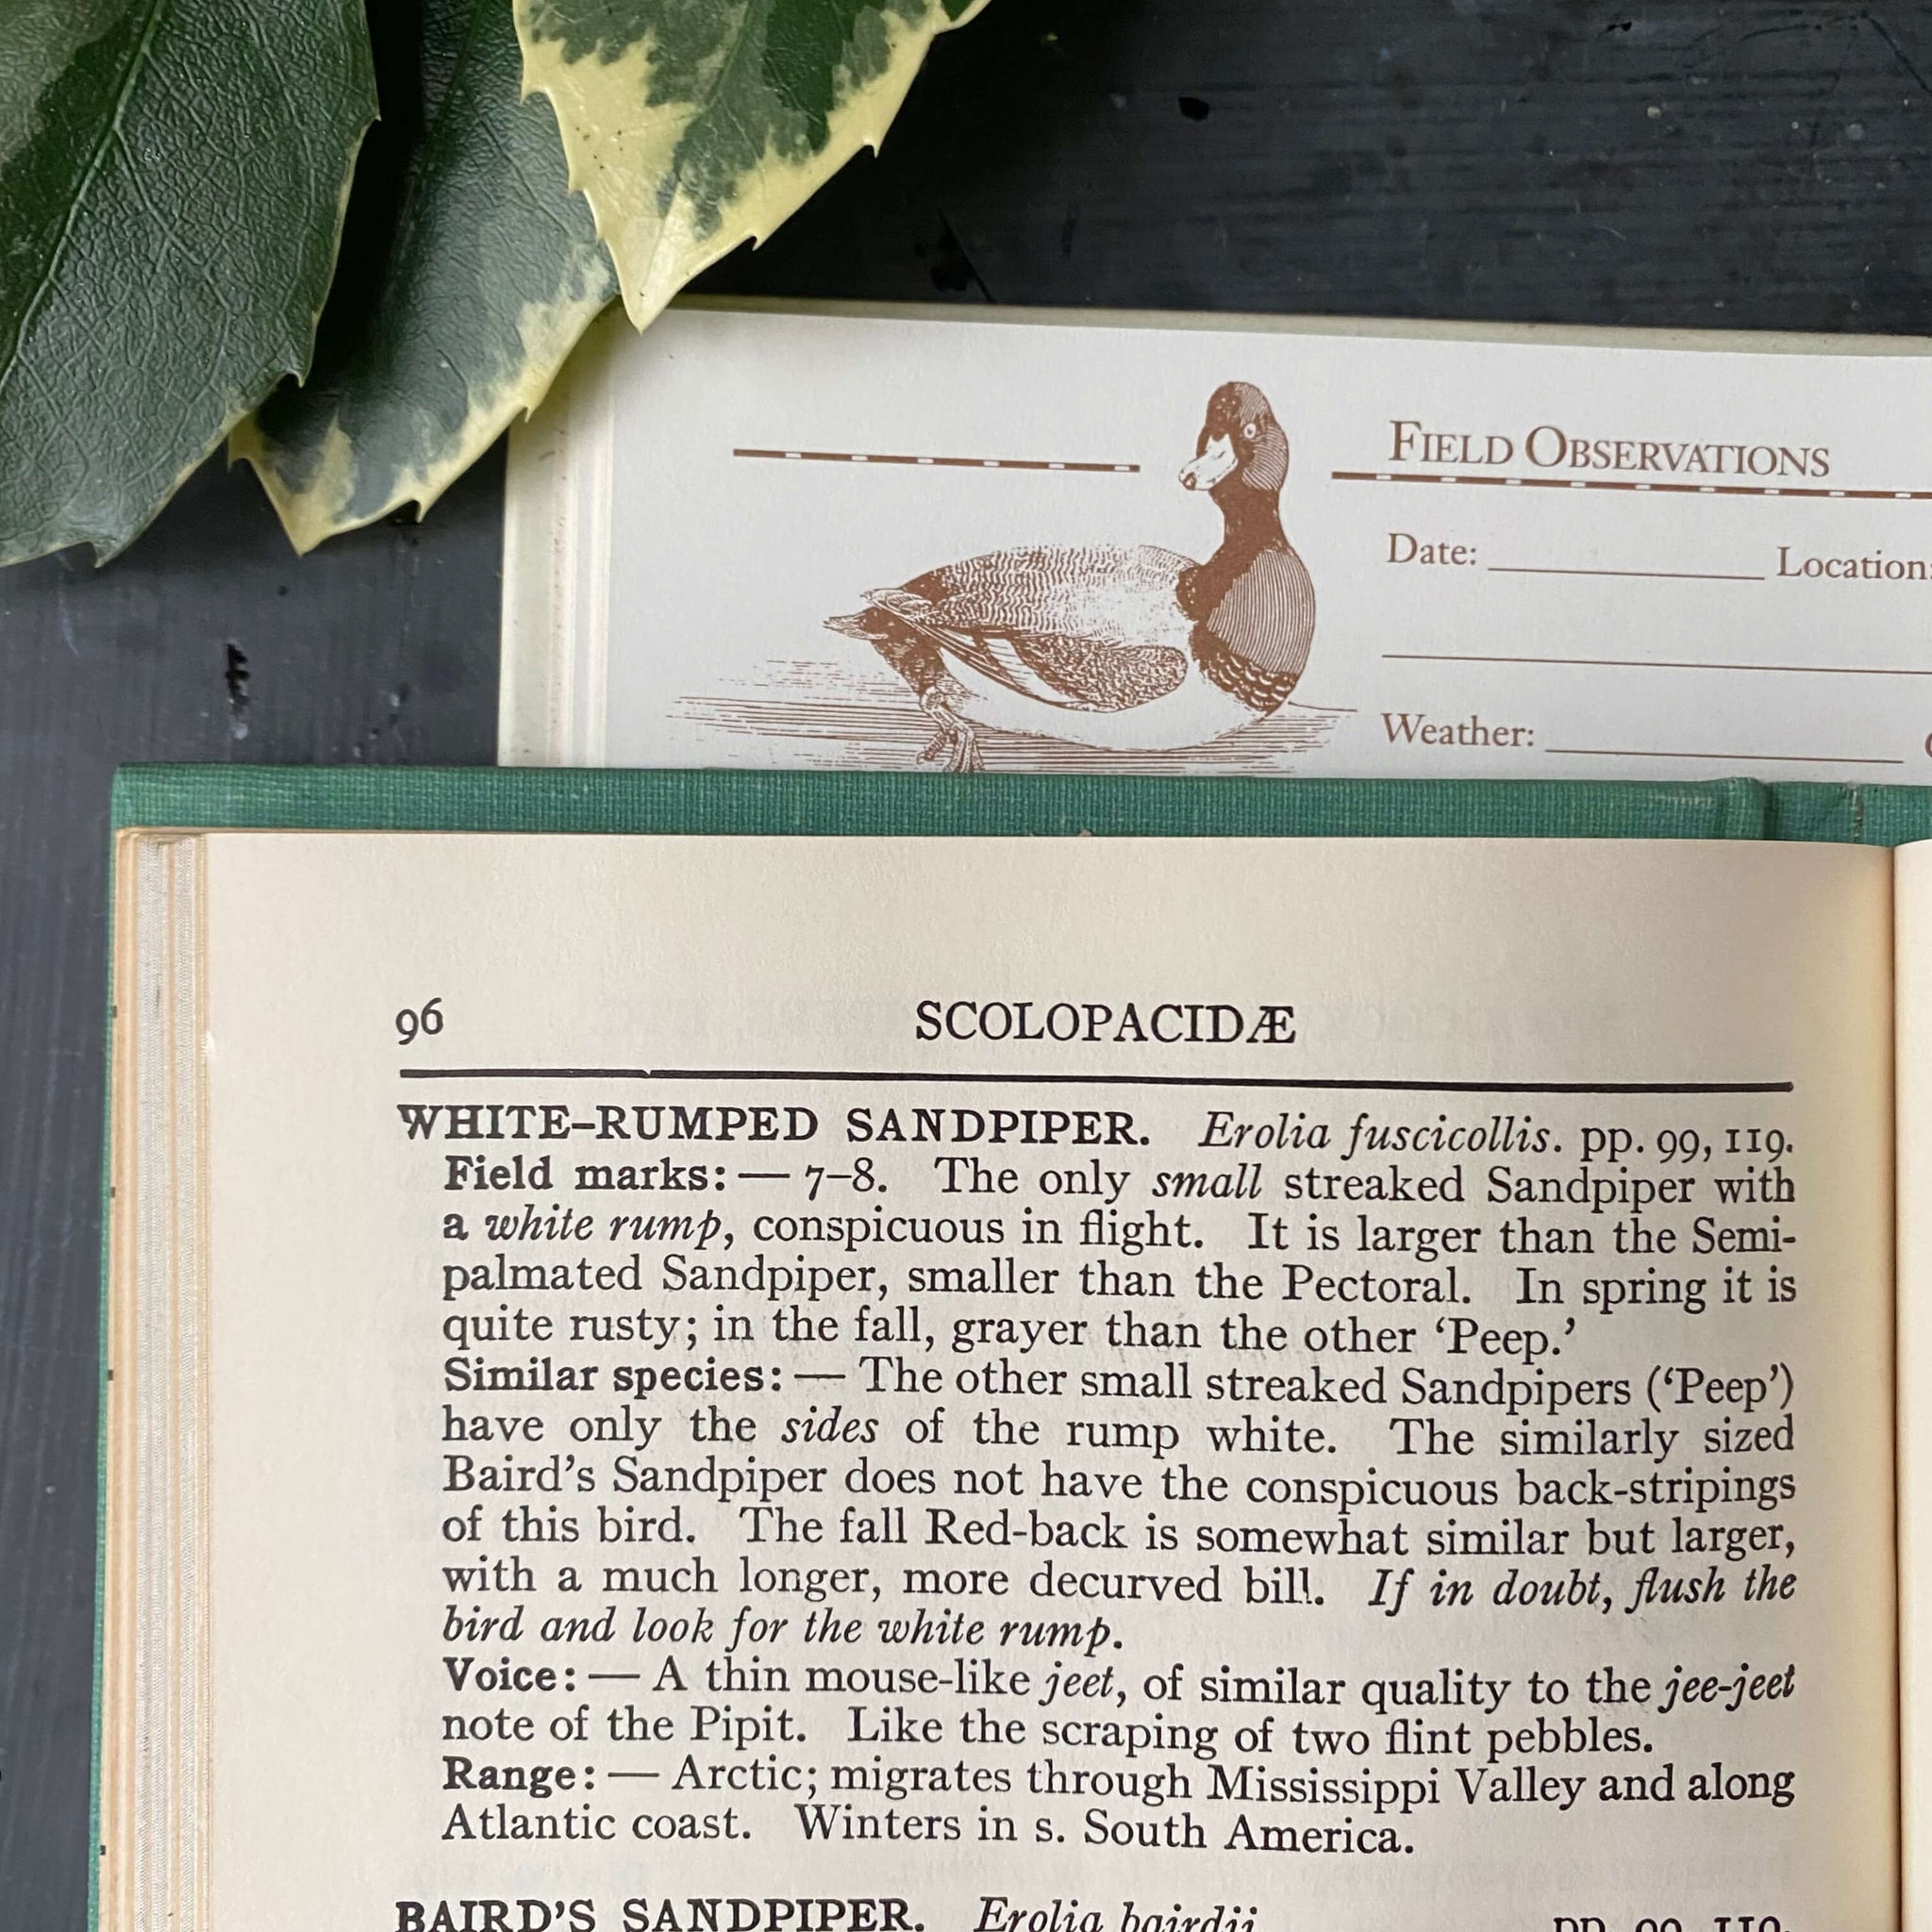 A Field Guide to the Birds by Roger Tory Peterson - 1947 Edition 33rd Printing